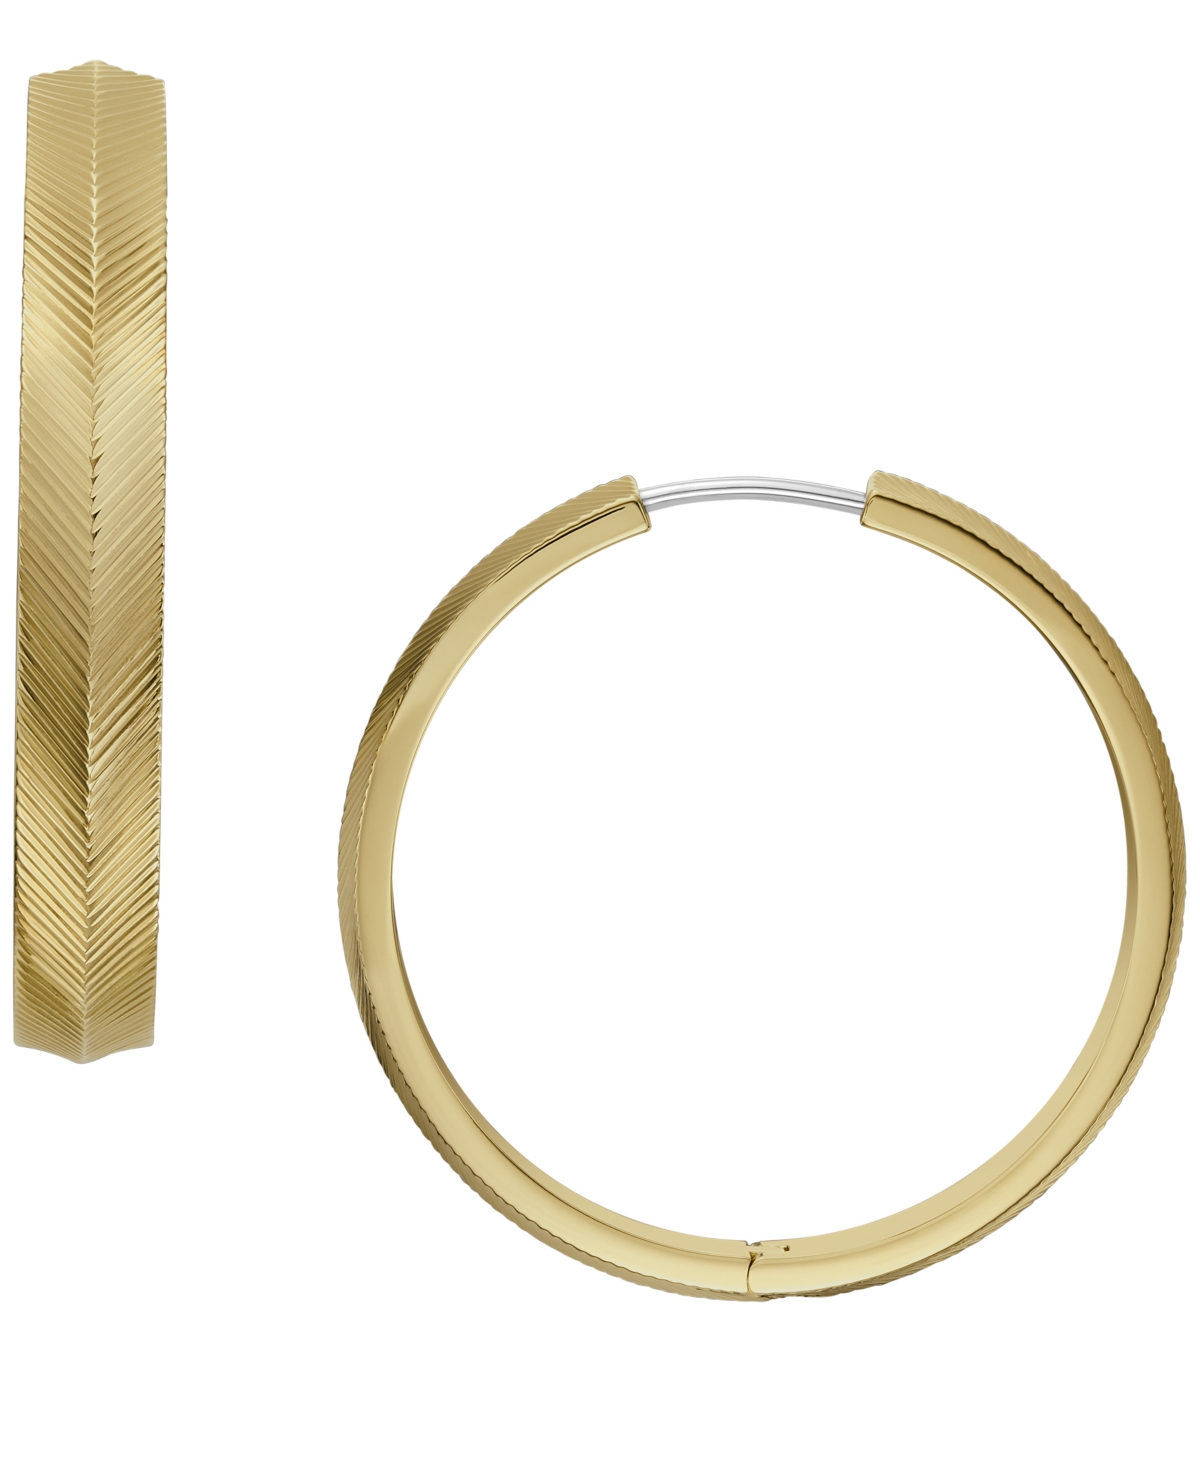 Fossil Harlow Linear Texture Gold-tone Stainless Steel Hoop Earrings